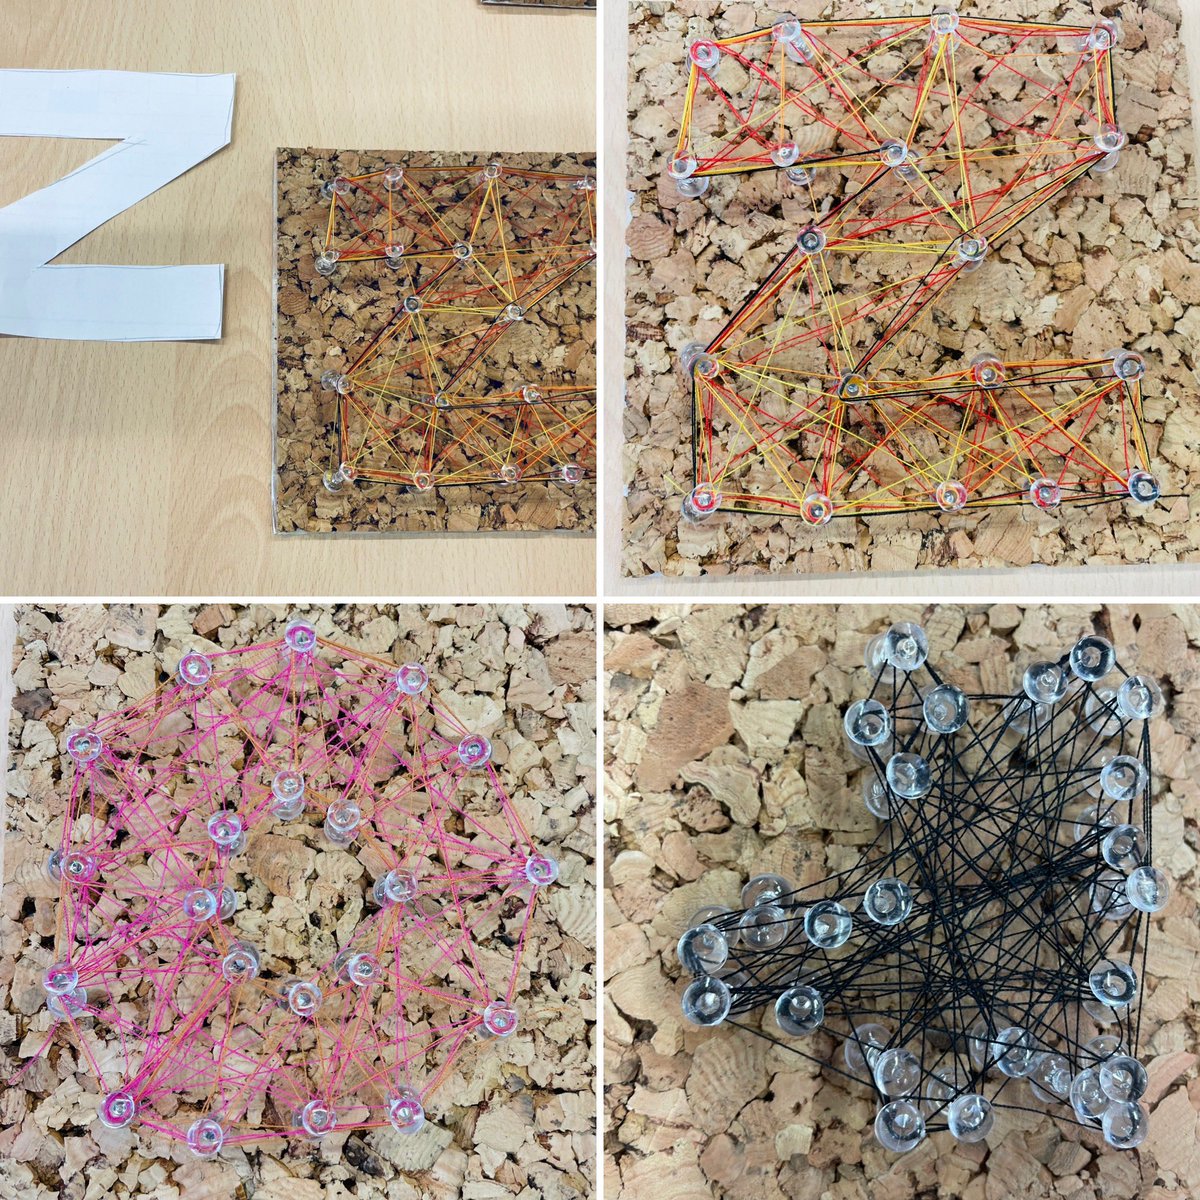 KS2 @HHELCNottingham built mini dens adding a mini figure to transform the scale of the model. We then created pin & string art inspired by the Spirograph from last week. Combining Art & STEM creatively. Inspiring further maths/science ideas for teachers. #Creative #STEAM #T4C